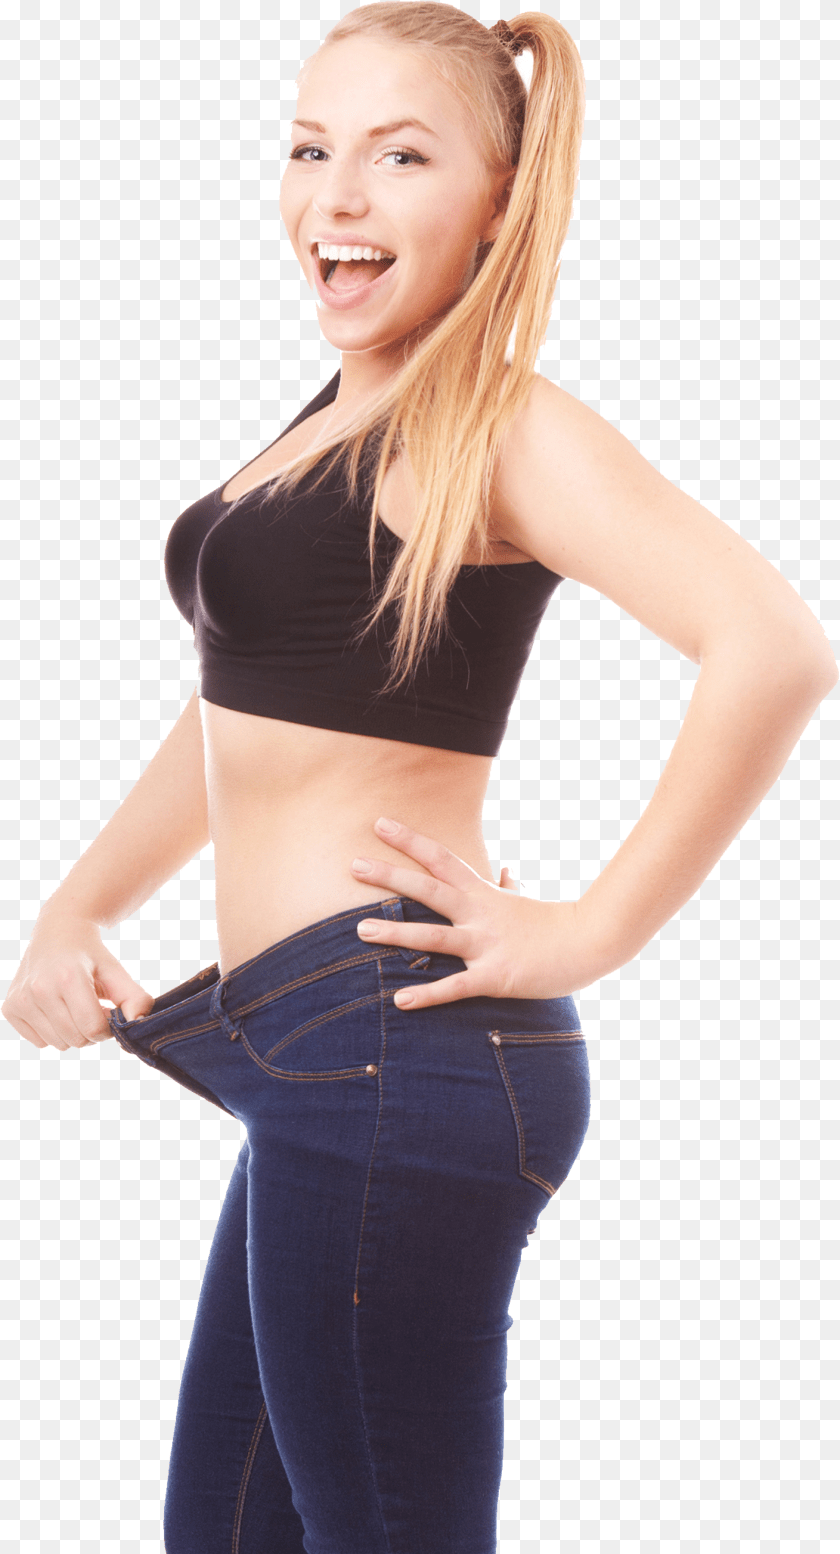 1409x2607 Weight Loss Download Weight Loss After And Before Pants, Clothing, Jeans, Adult PNG